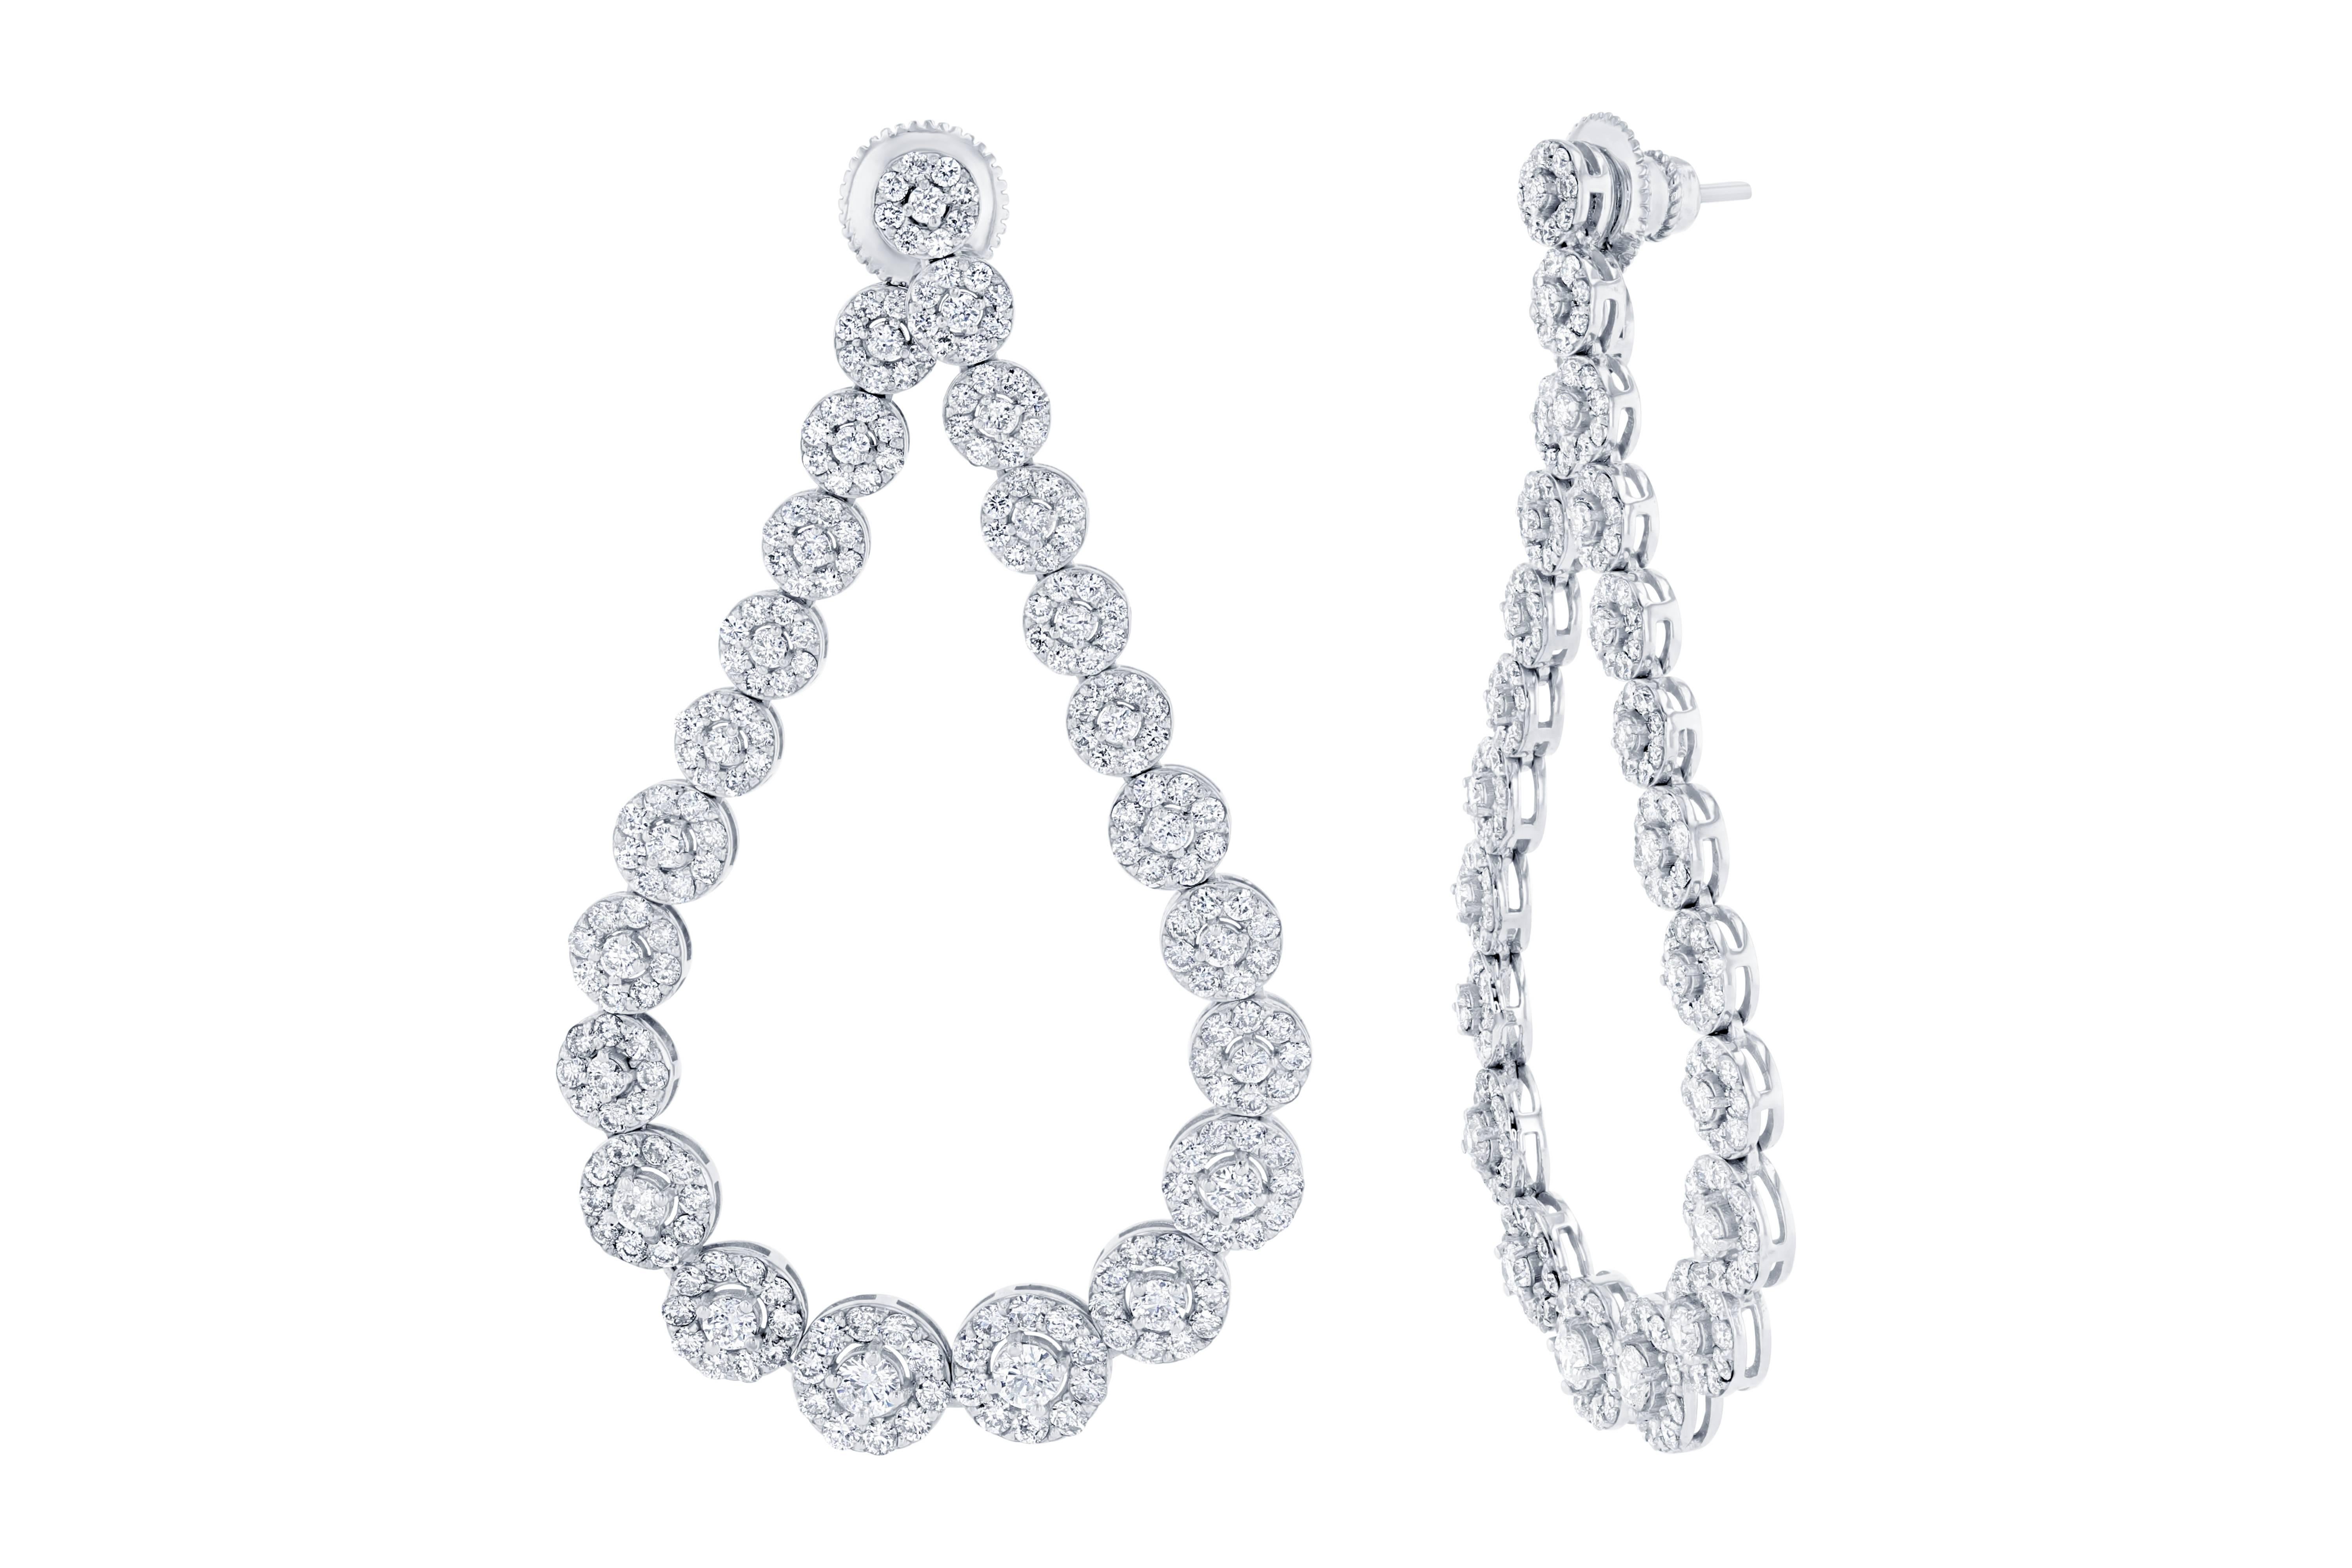 These stunners are made to elevate your wardrobe and make you look fabulous!!  The setting is very unique and flattering.  There are 438 Round Cut Diamonds that weigh 7.66 carats (Clarity: SI2, Color: F).  The design of the earrings is a graduating